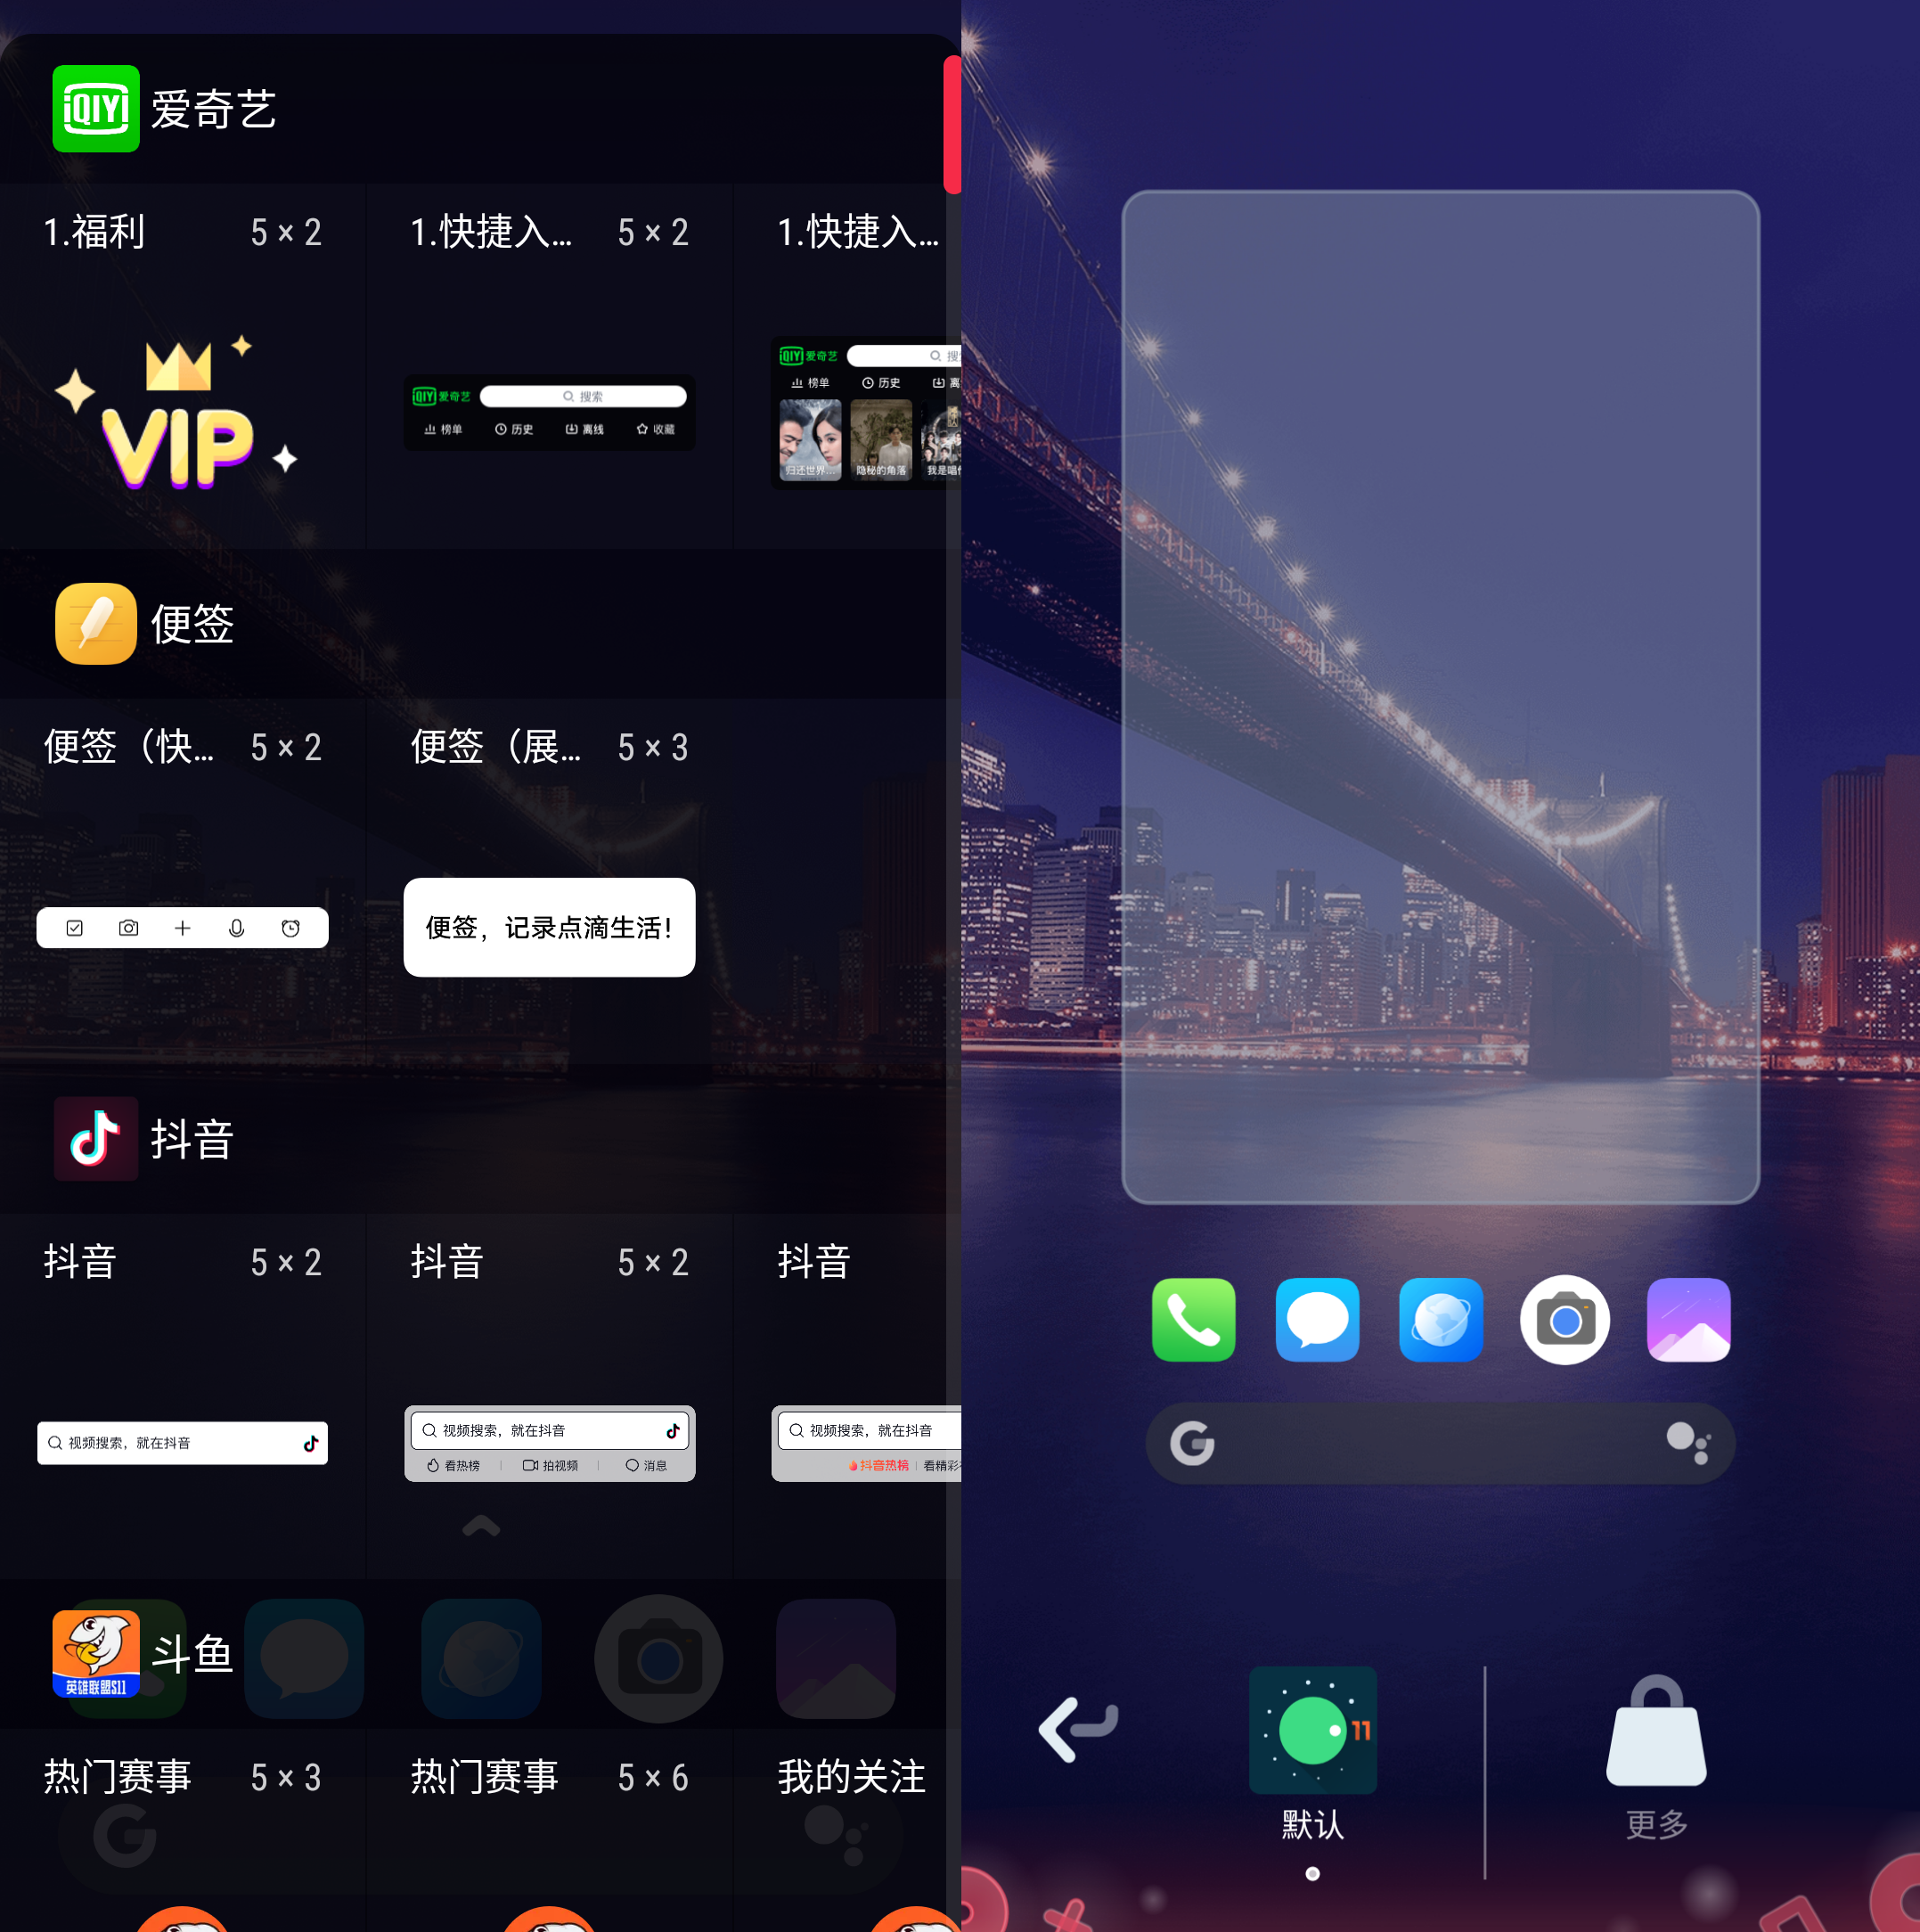 Android hyperion_eighty seven启动器 中文版